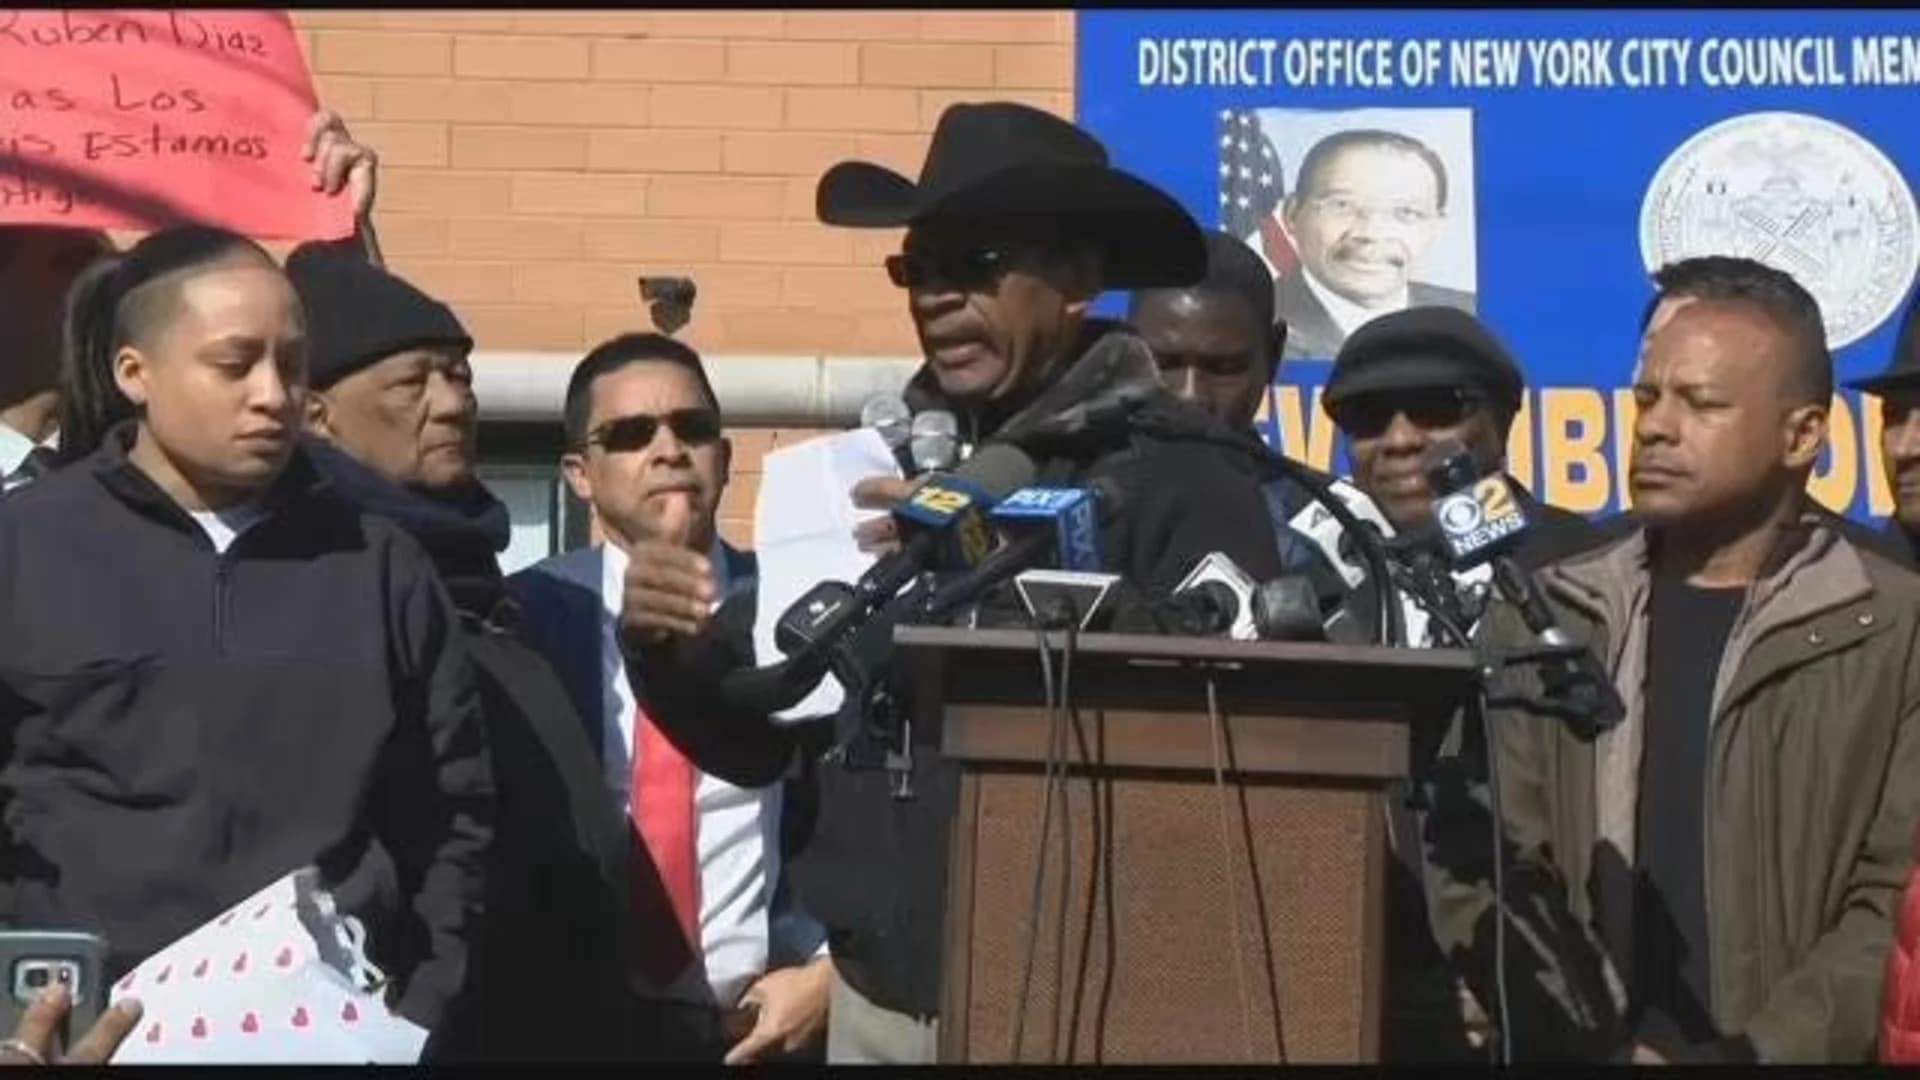 Councilman Diaz Sr. rallies supporters days after stirring controversy